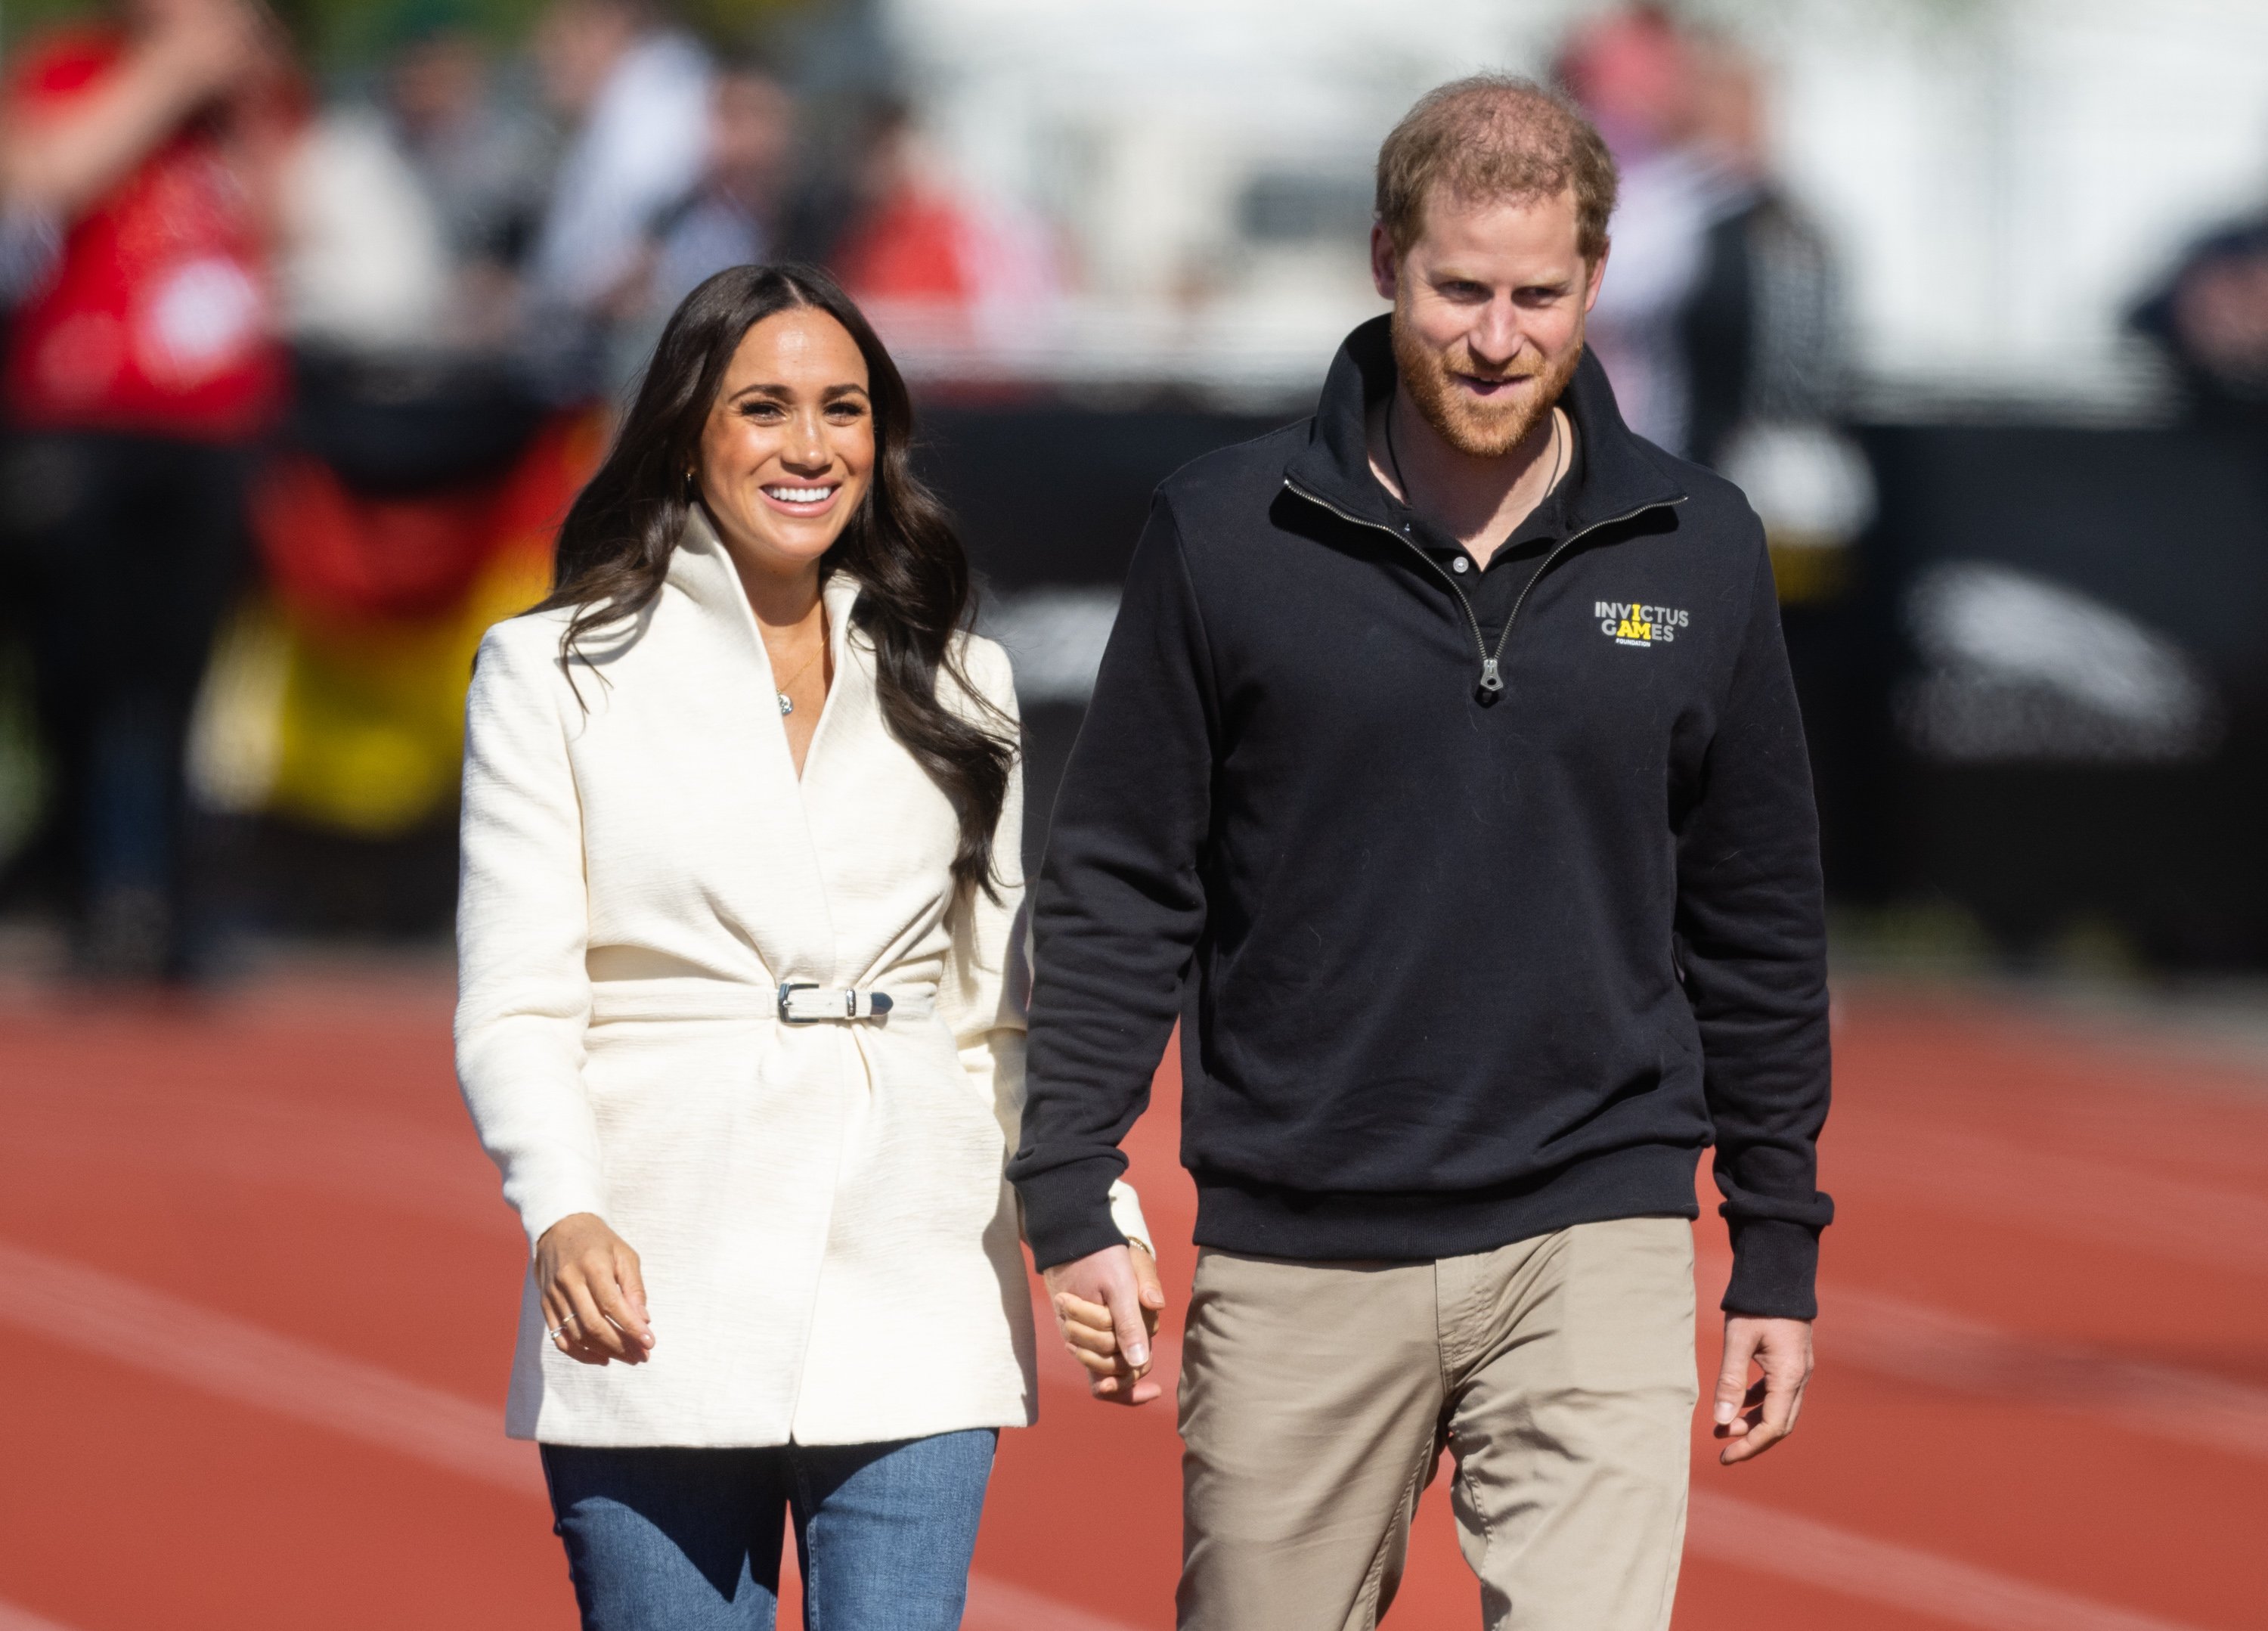  Prince Harry, Duke of Sussex and Meghan, Duchess of Sussex attend the athletics on day two of the Invictus Games 2020 at Zuiderpark on April 17, 2022 in The Hague, Netherlands. | Source: Getty Images